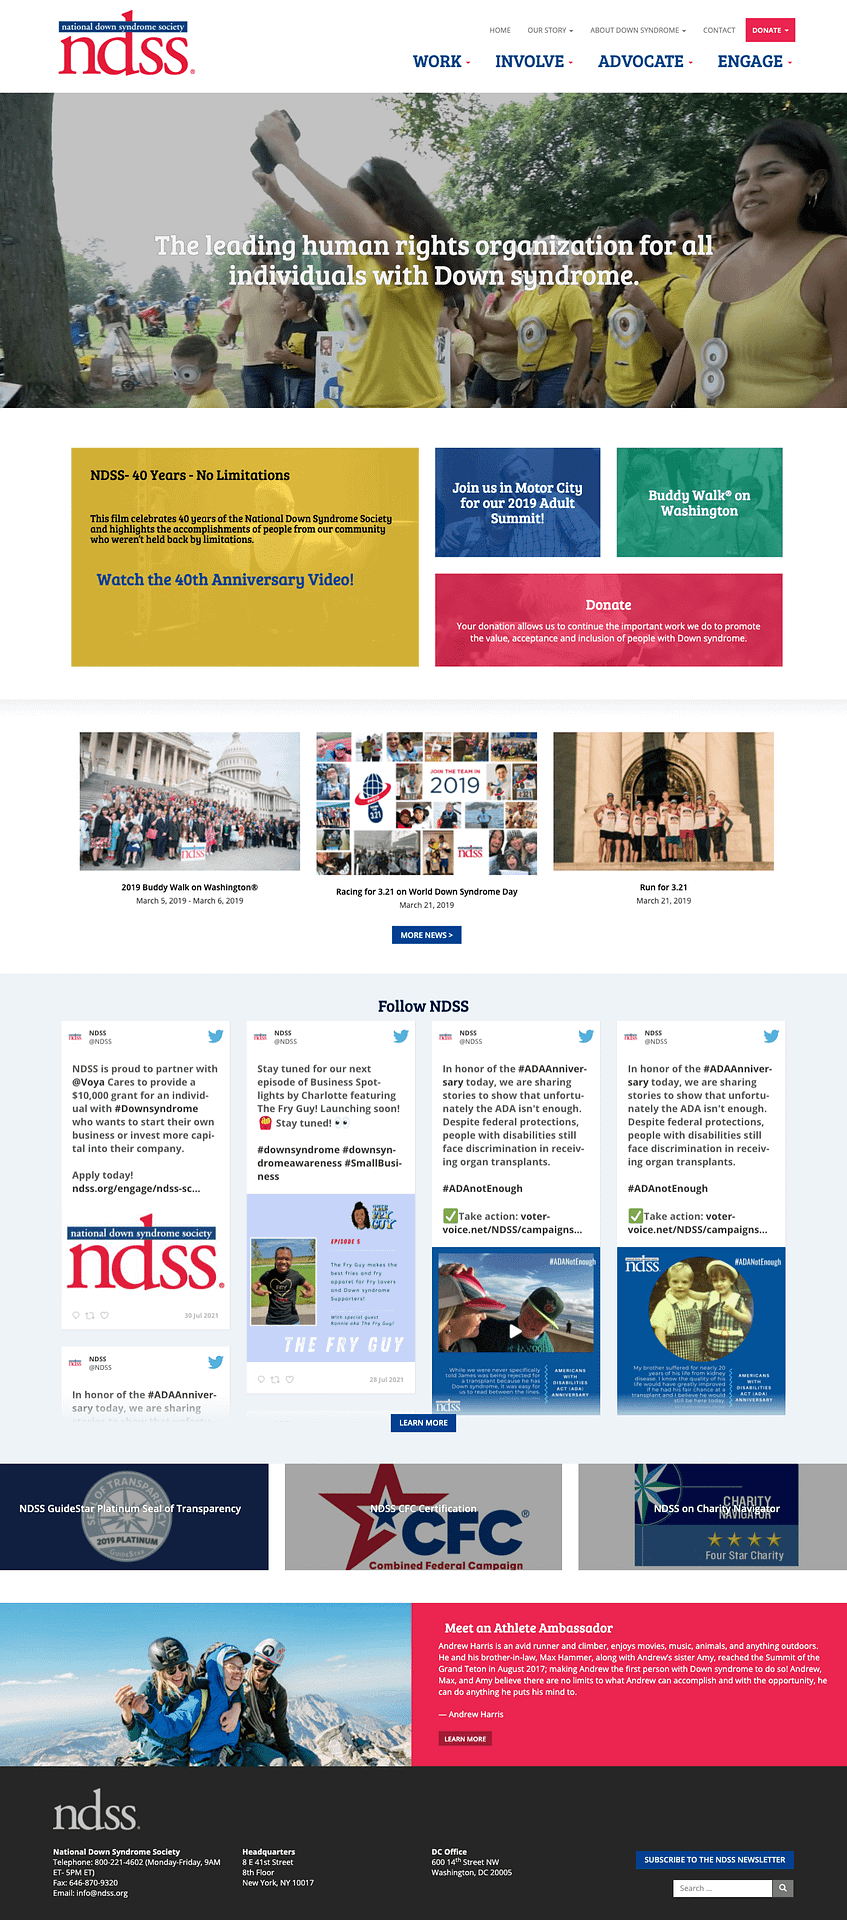 National Down Syndrome Society website design detail